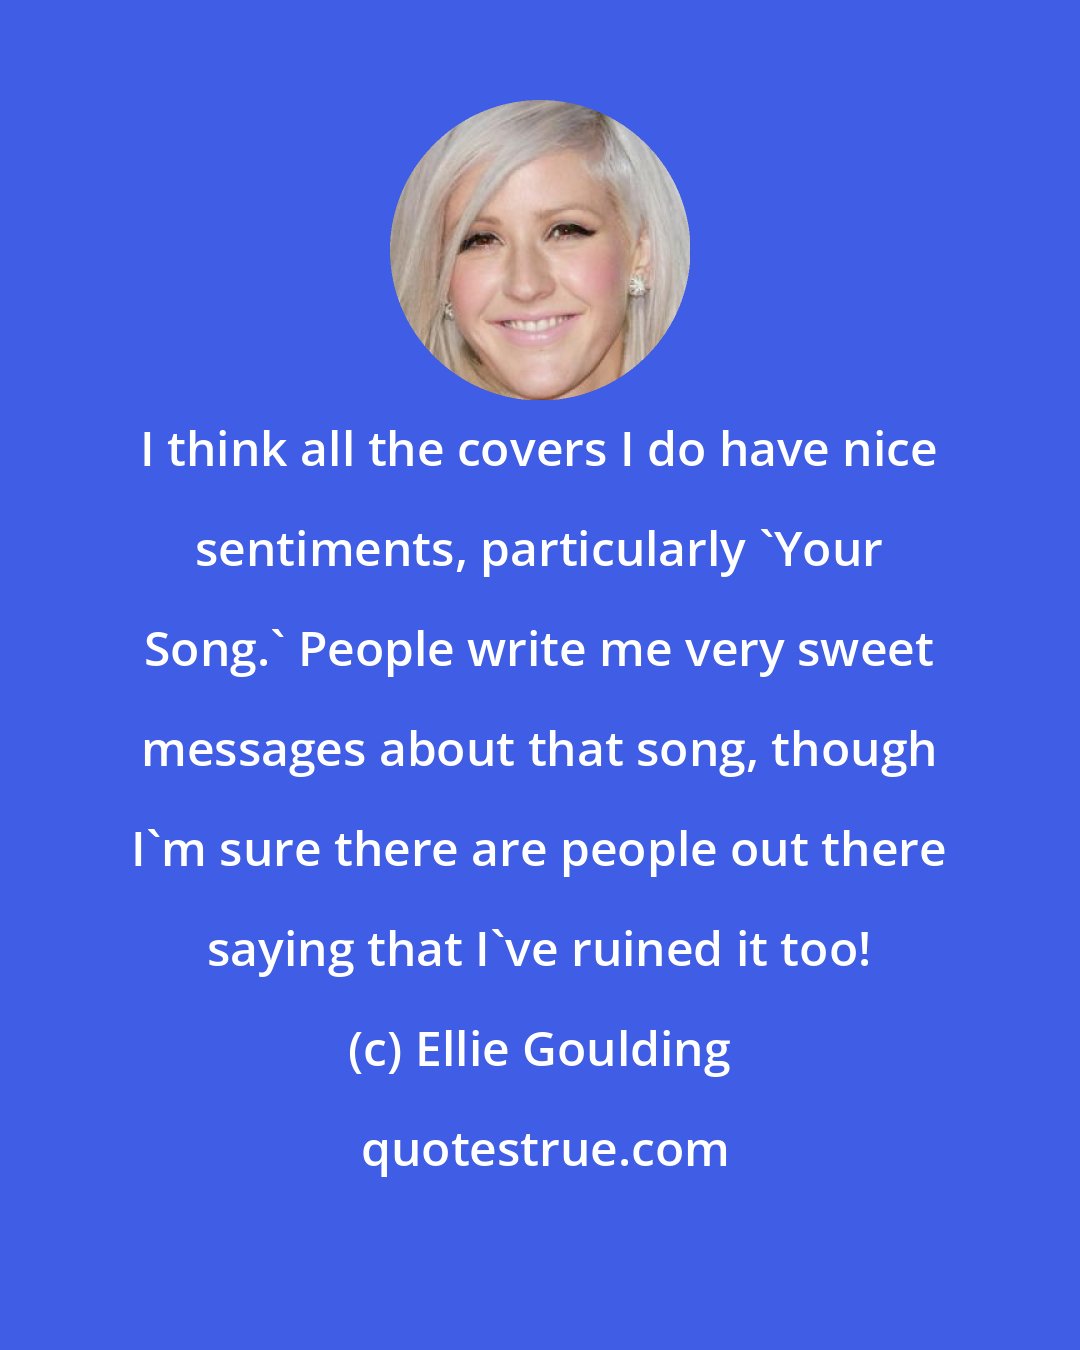 Ellie Goulding: I think all the covers I do have nice sentiments, particularly 'Your Song.' People write me very sweet messages about that song, though I'm sure there are people out there saying that I've ruined it too!